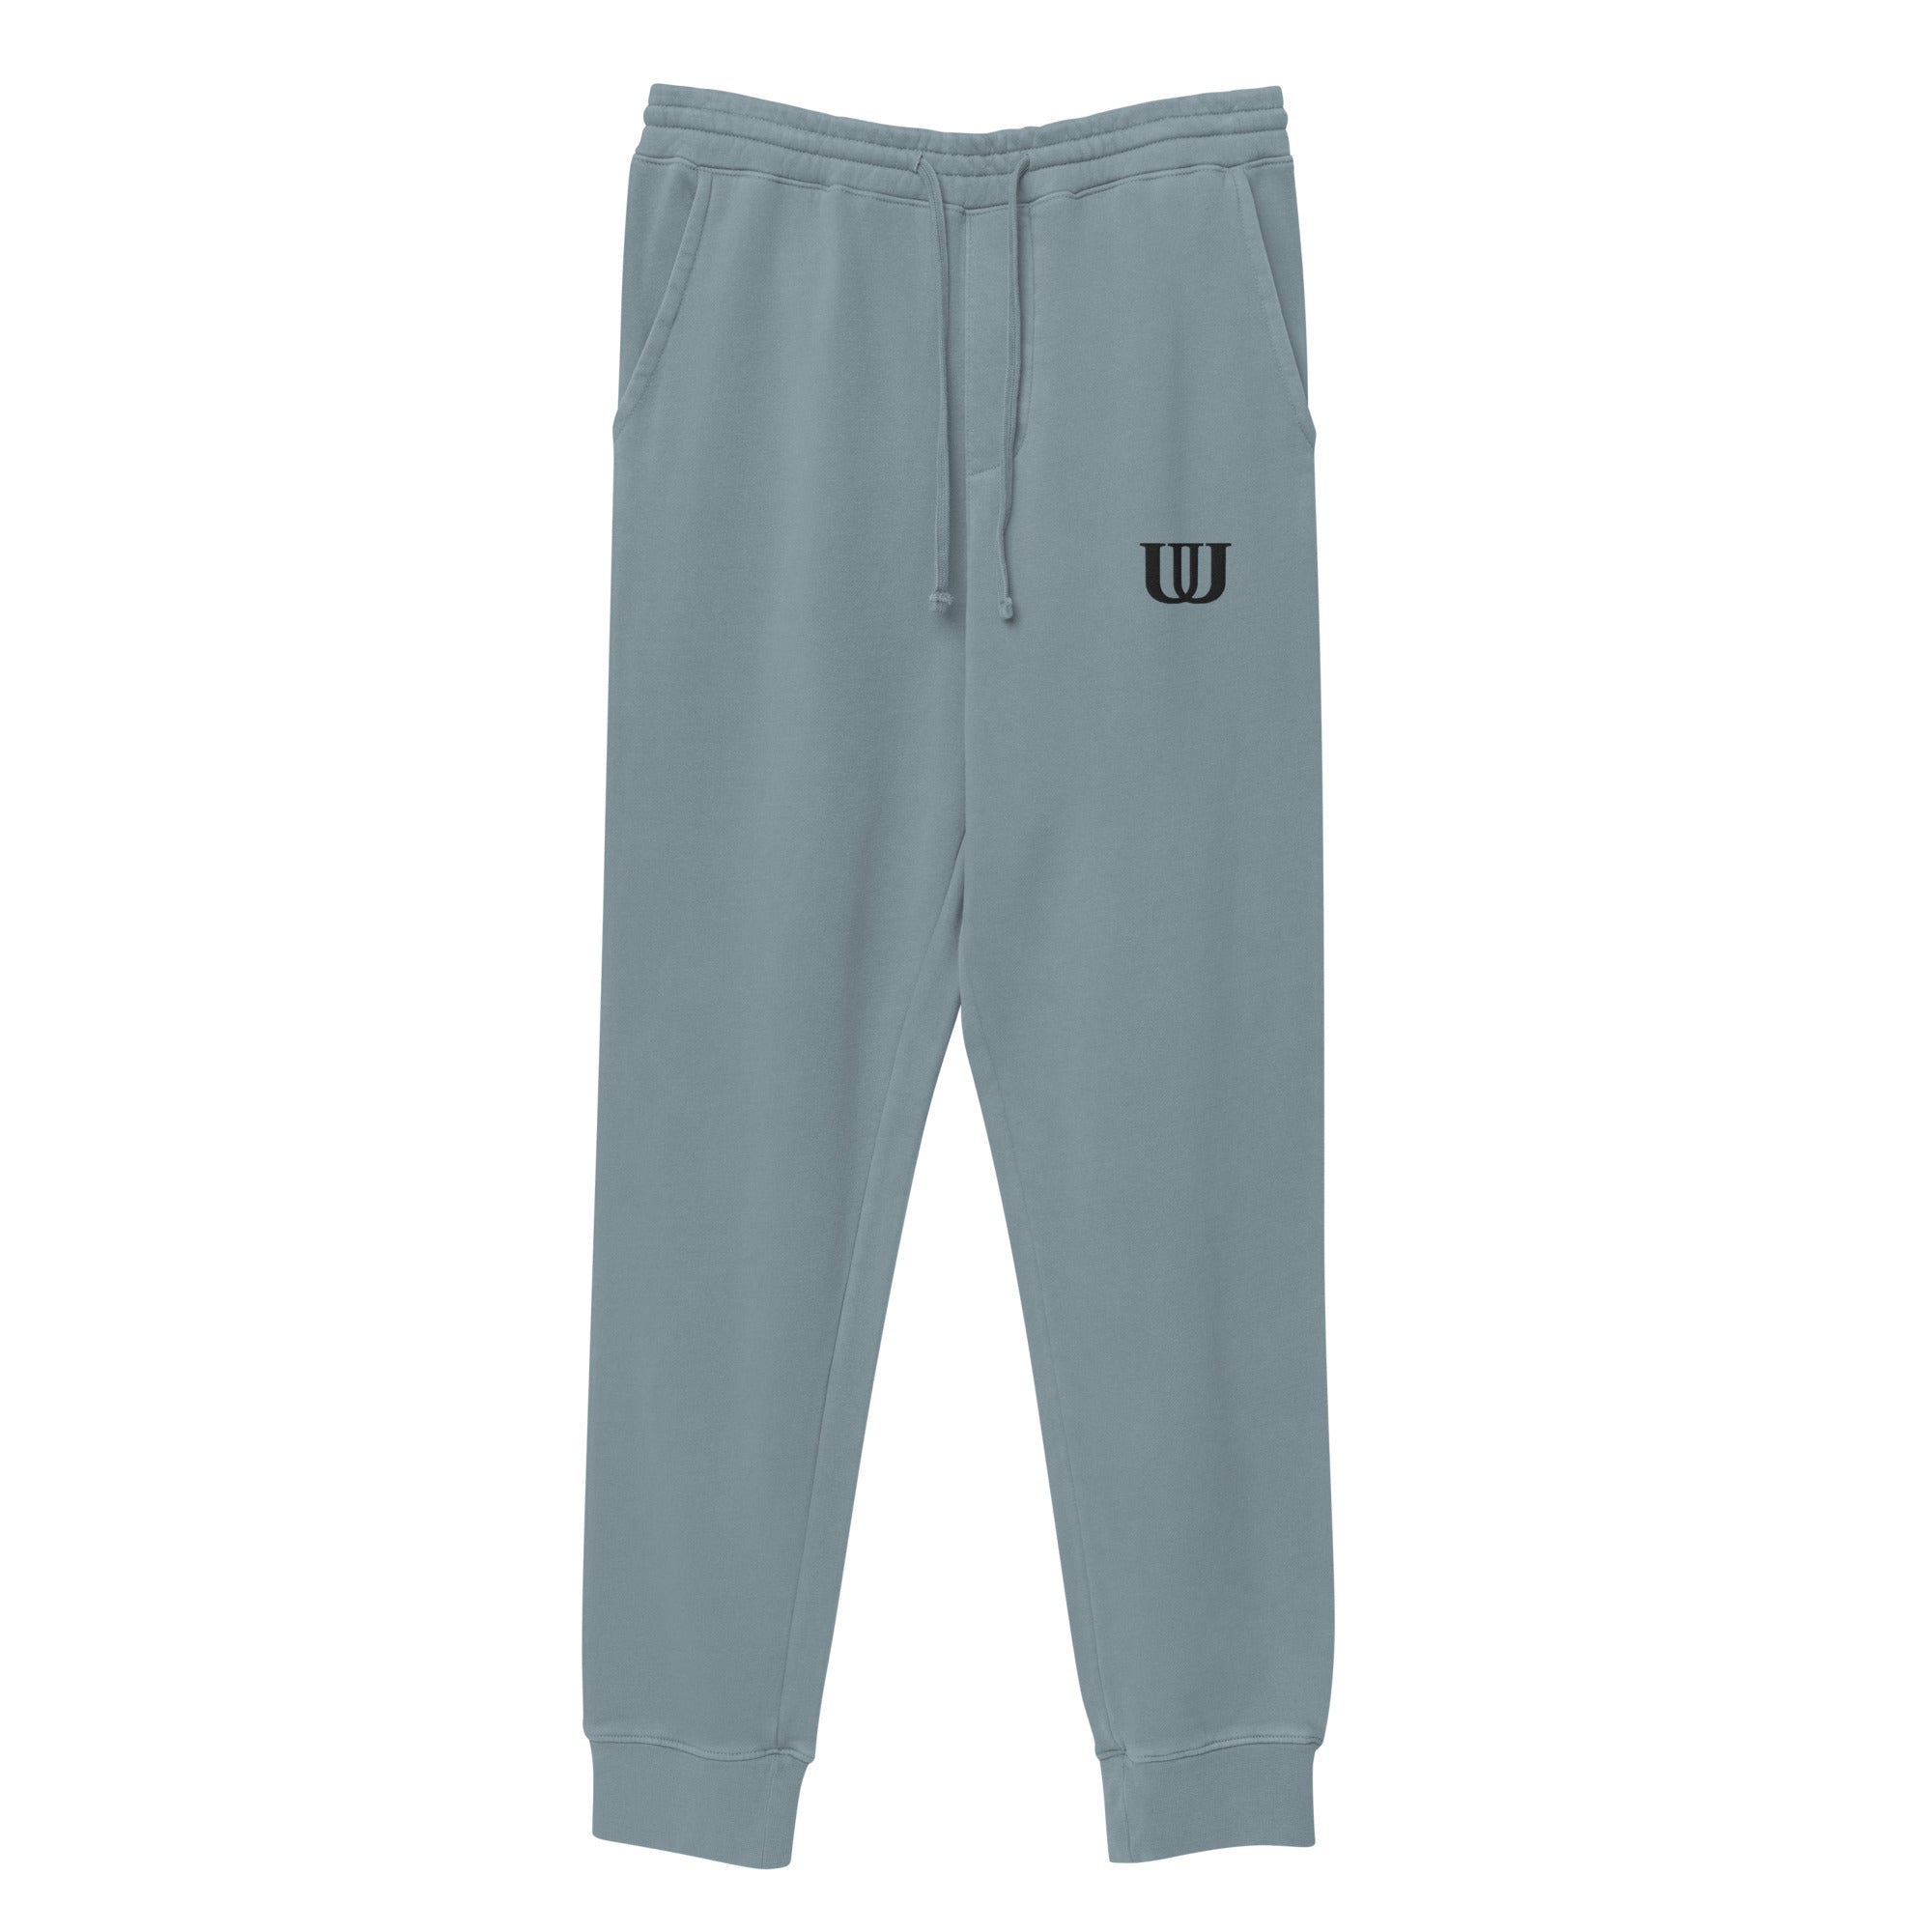 Embroidered Double UU pigment-dyed sweatpants